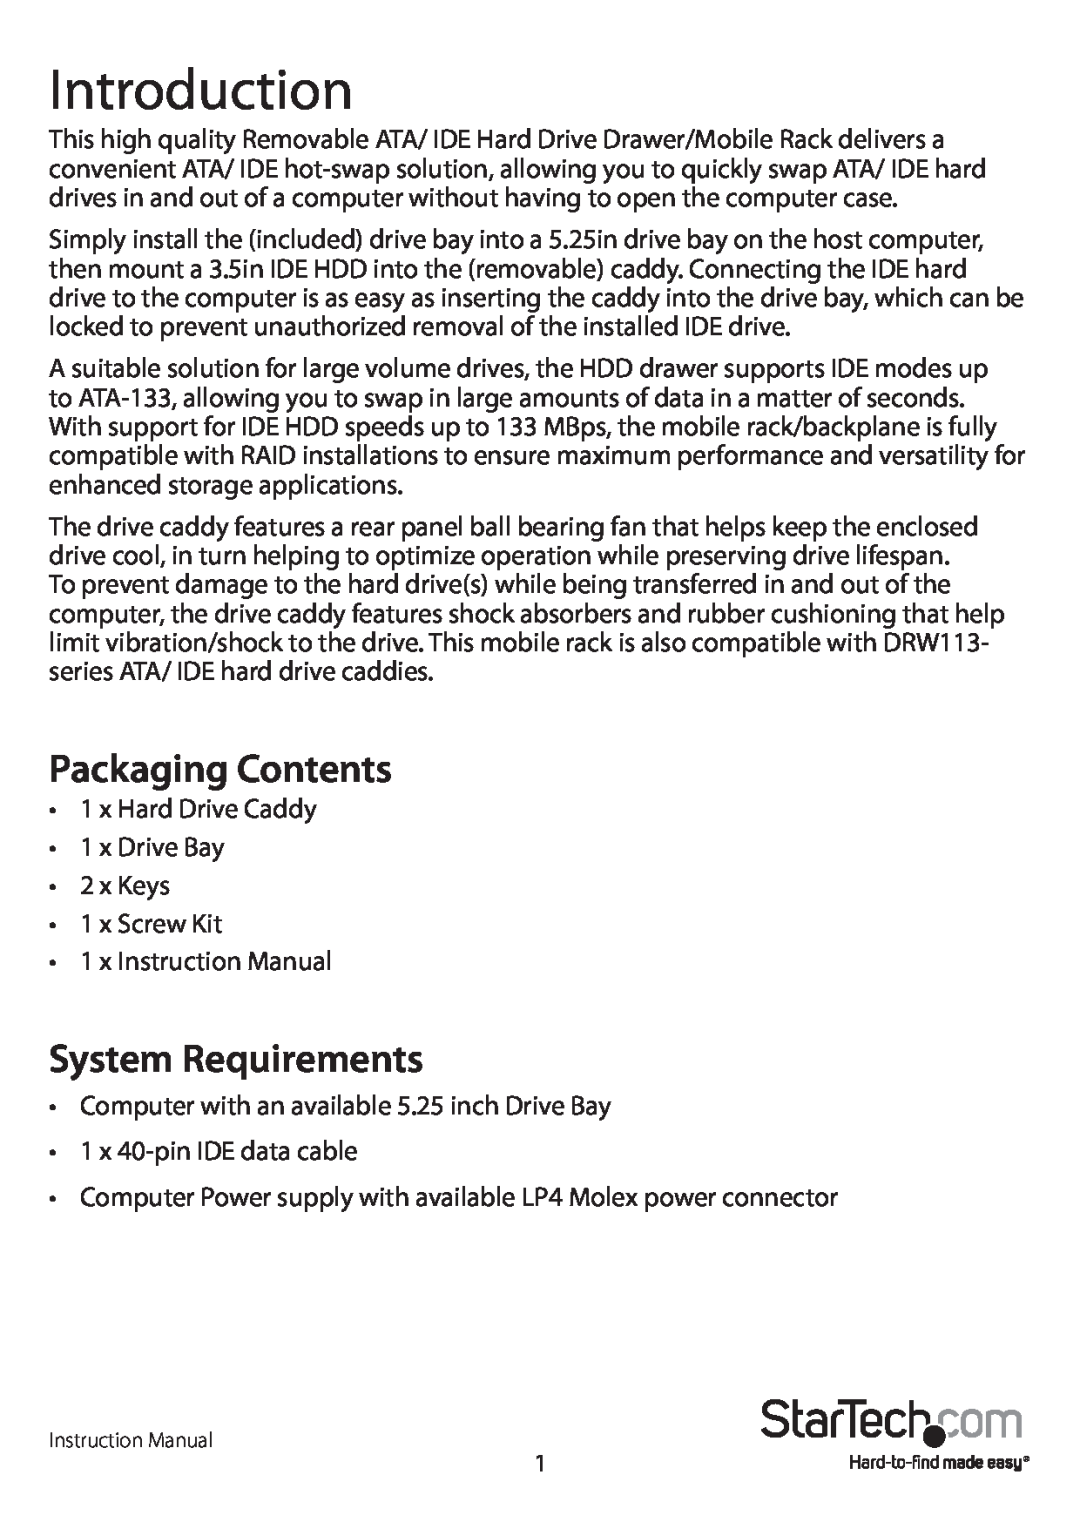 StarTech.com startech manual Introduction, Packaging Contents, System Requirements 